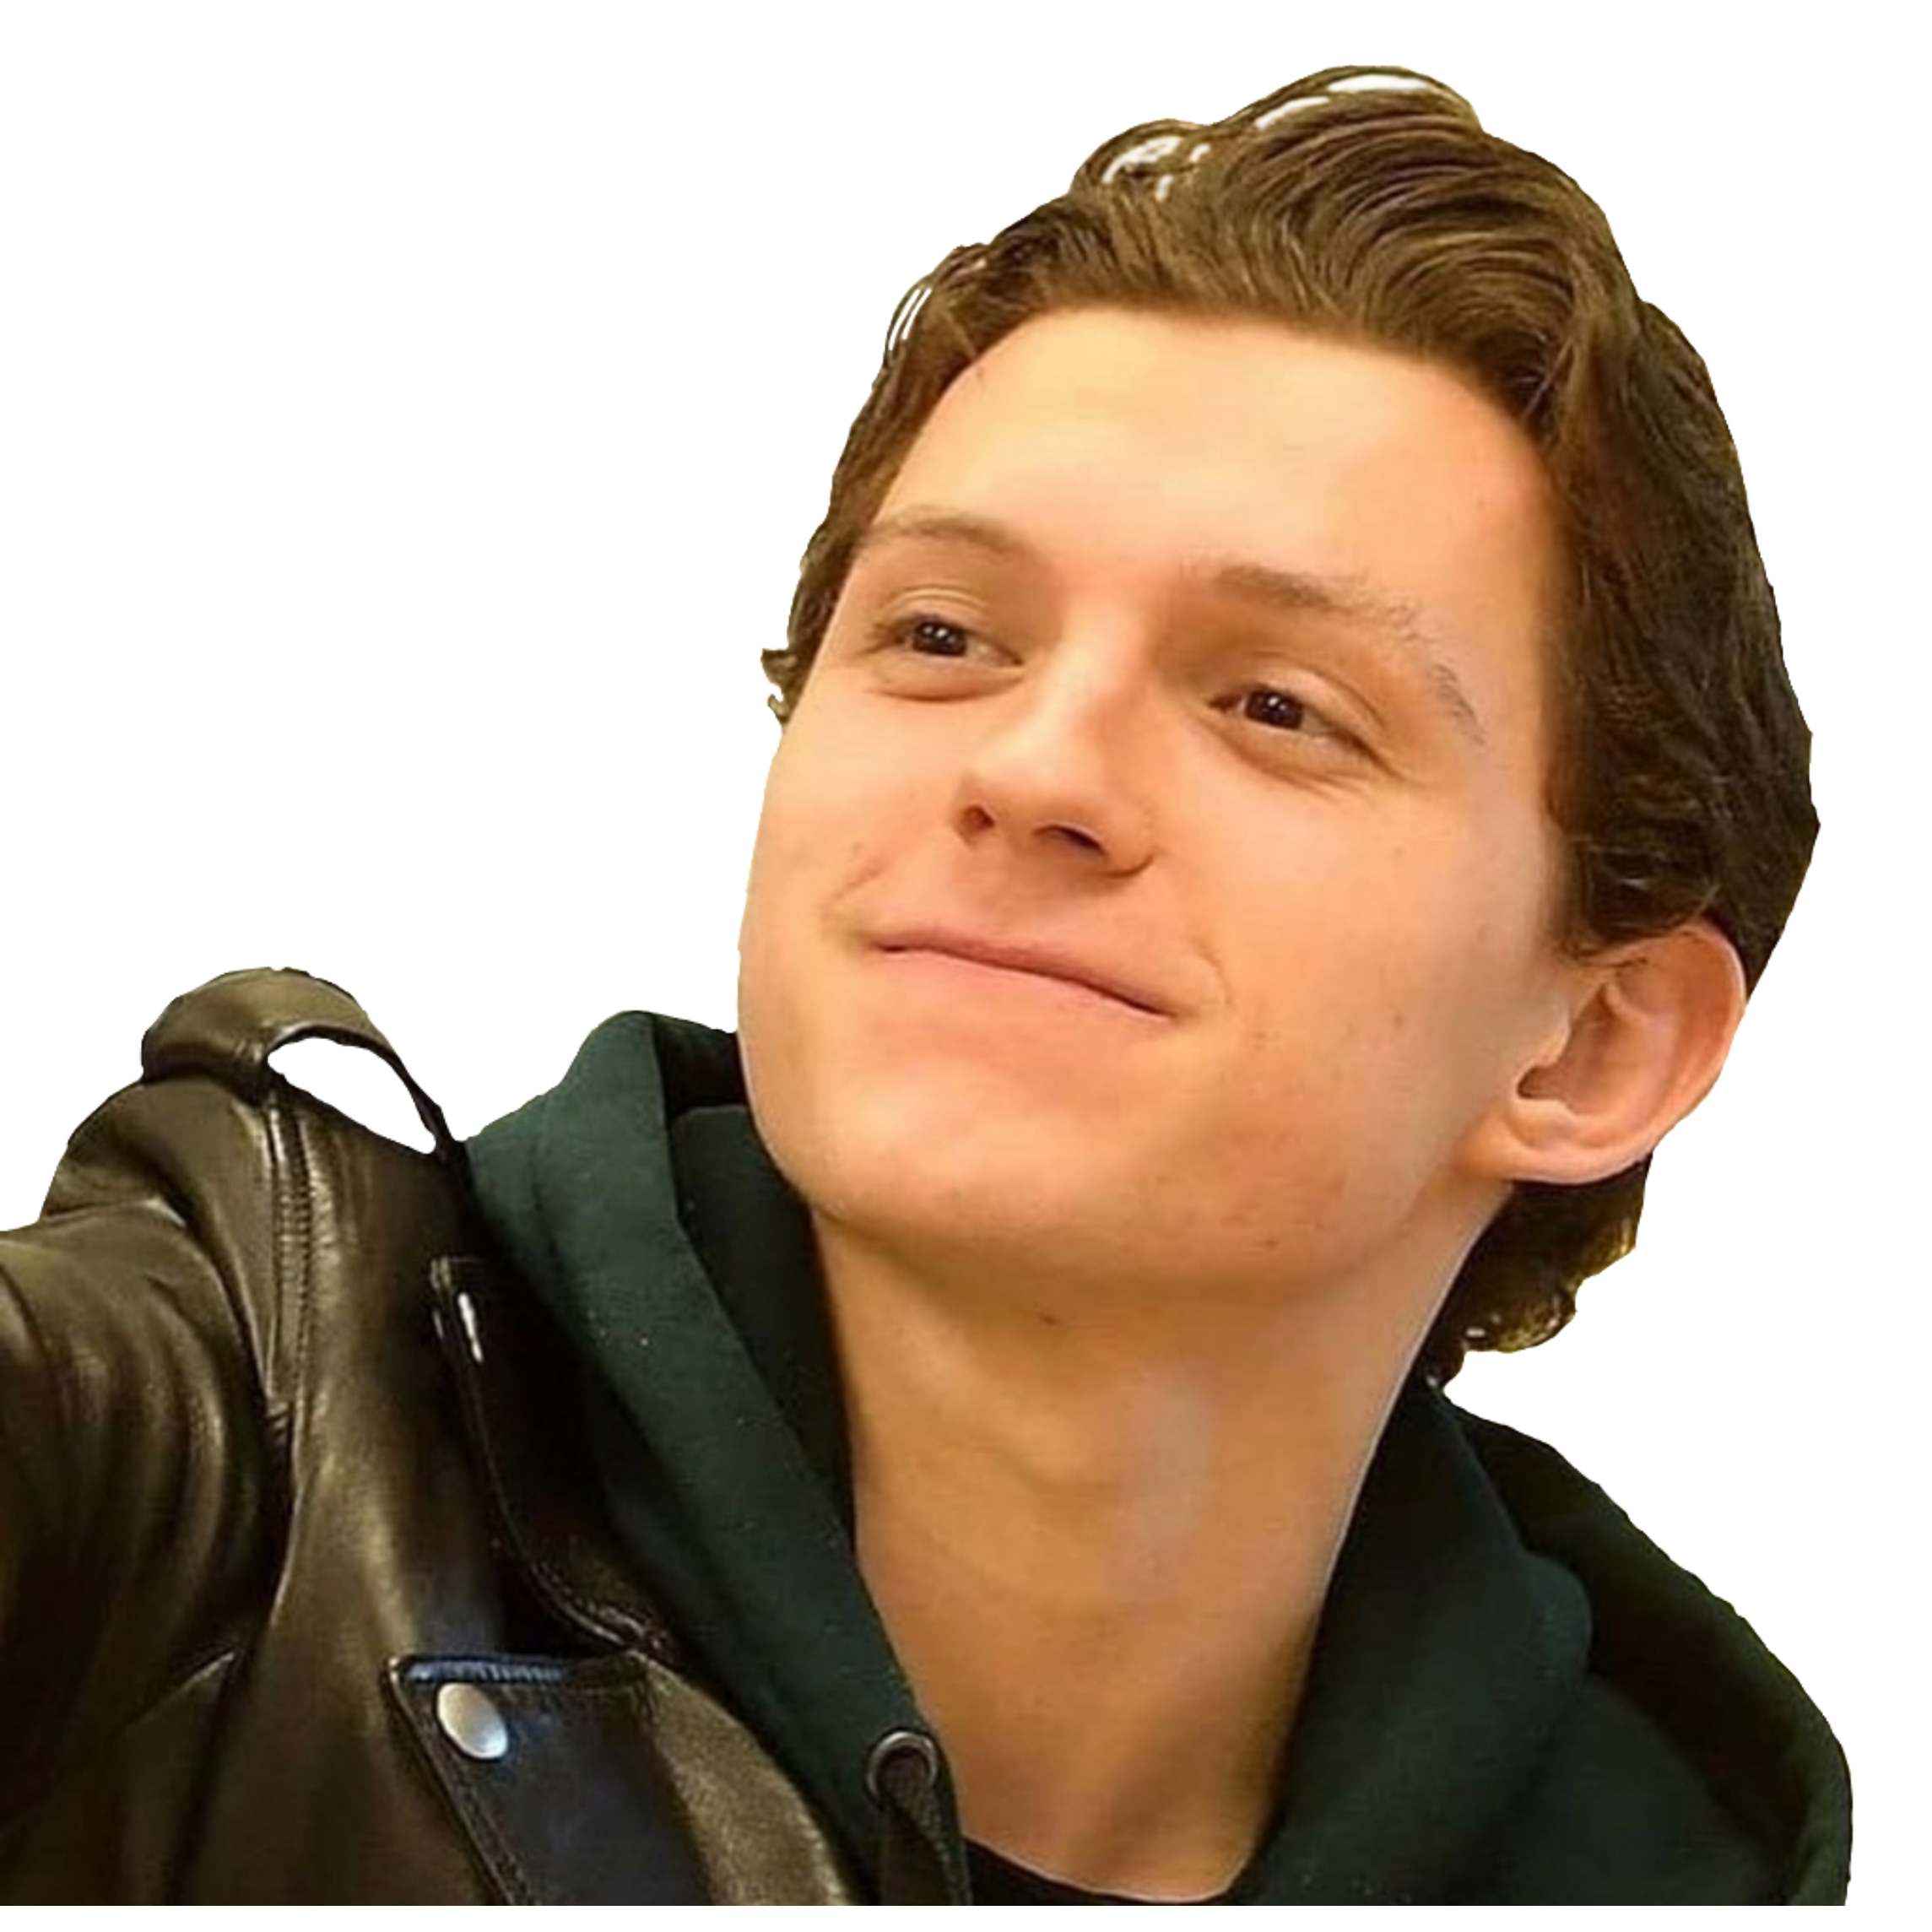 This visual is about tom holland tomholland spiderman peterparker freetoedi...